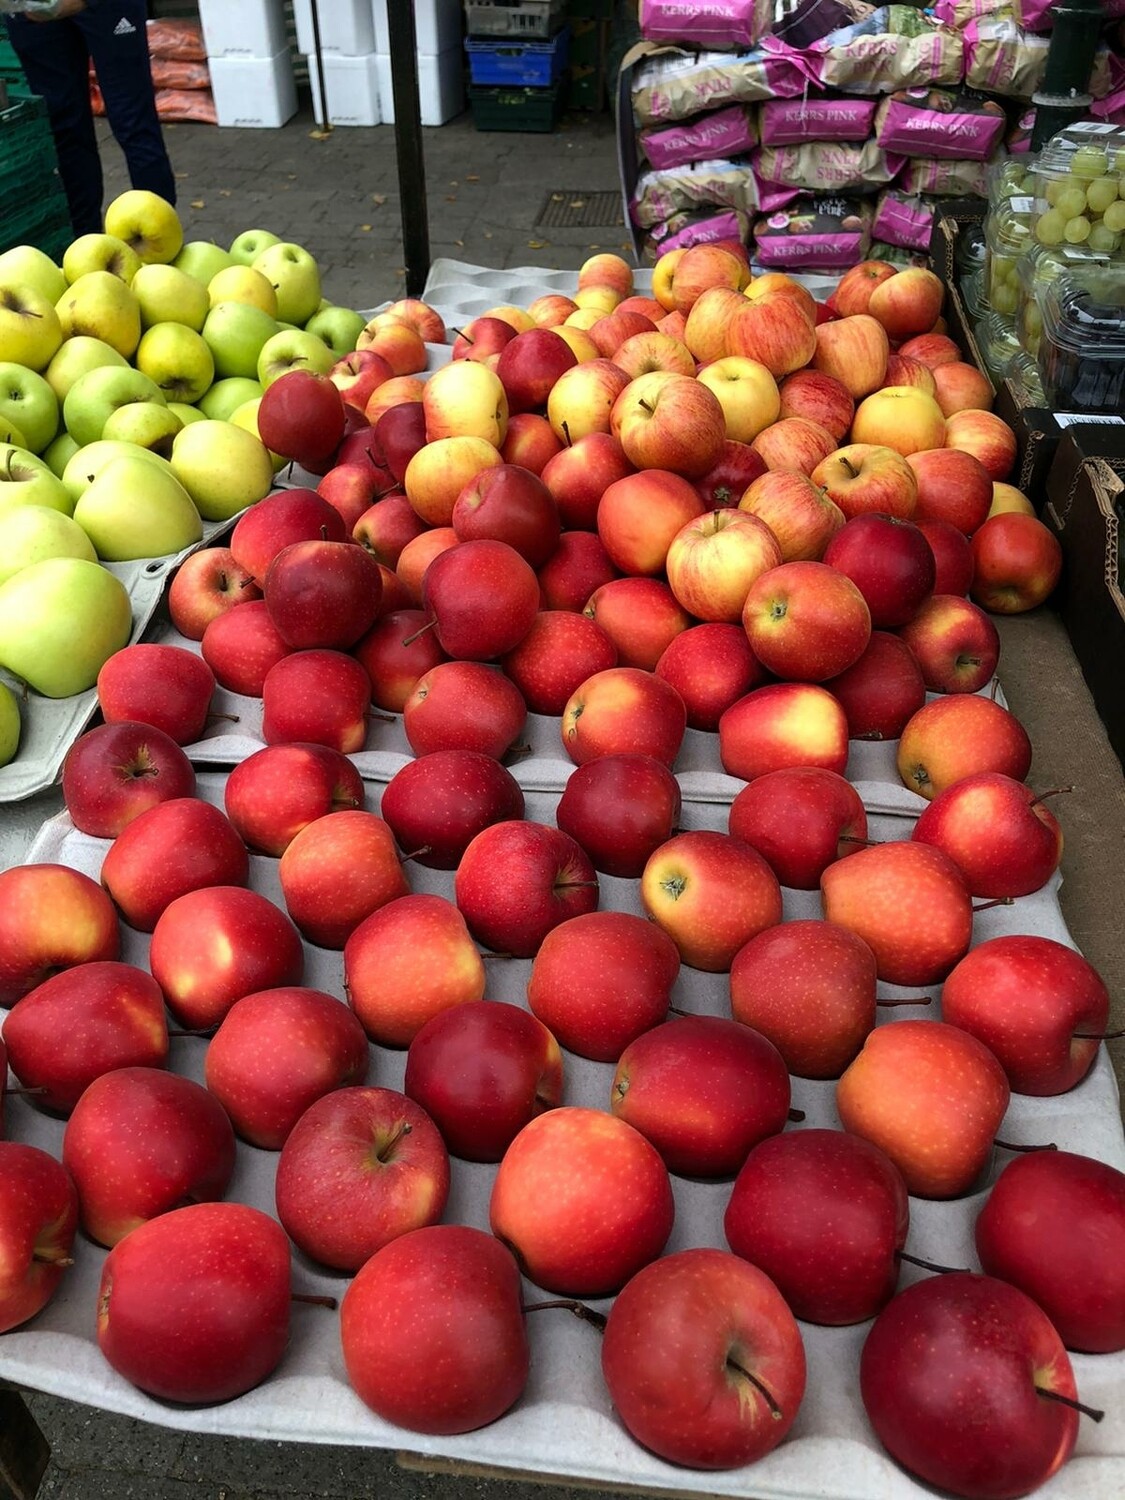 Large gala apples 7 for €2